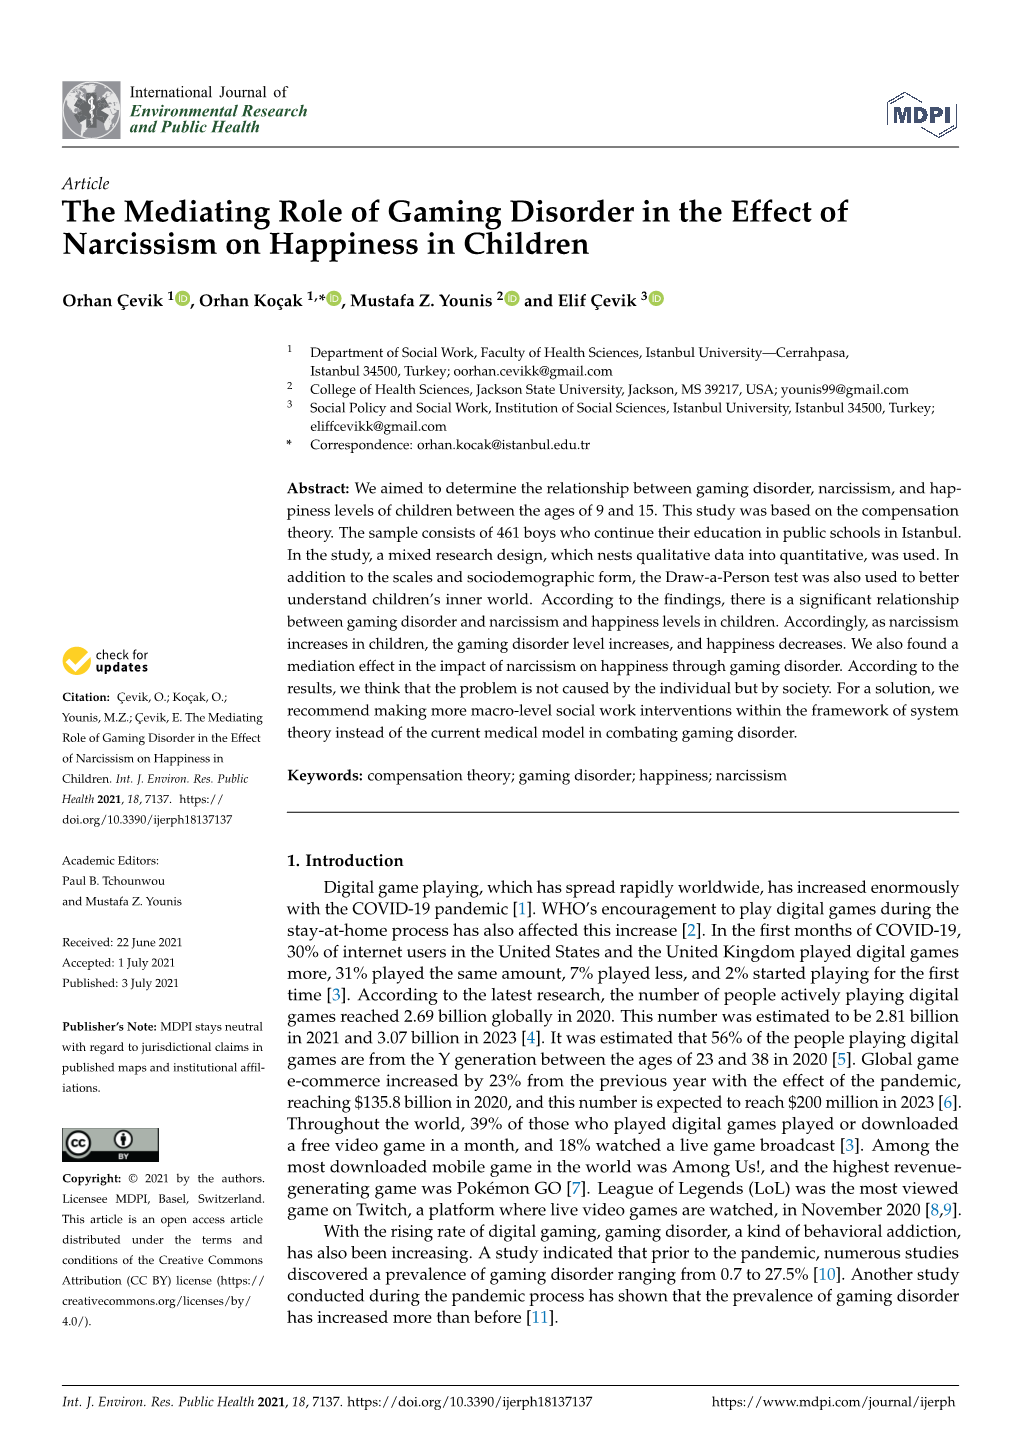 The Mediating Role of Gaming Disorder in the Effect of Narcissism on Happiness in Children